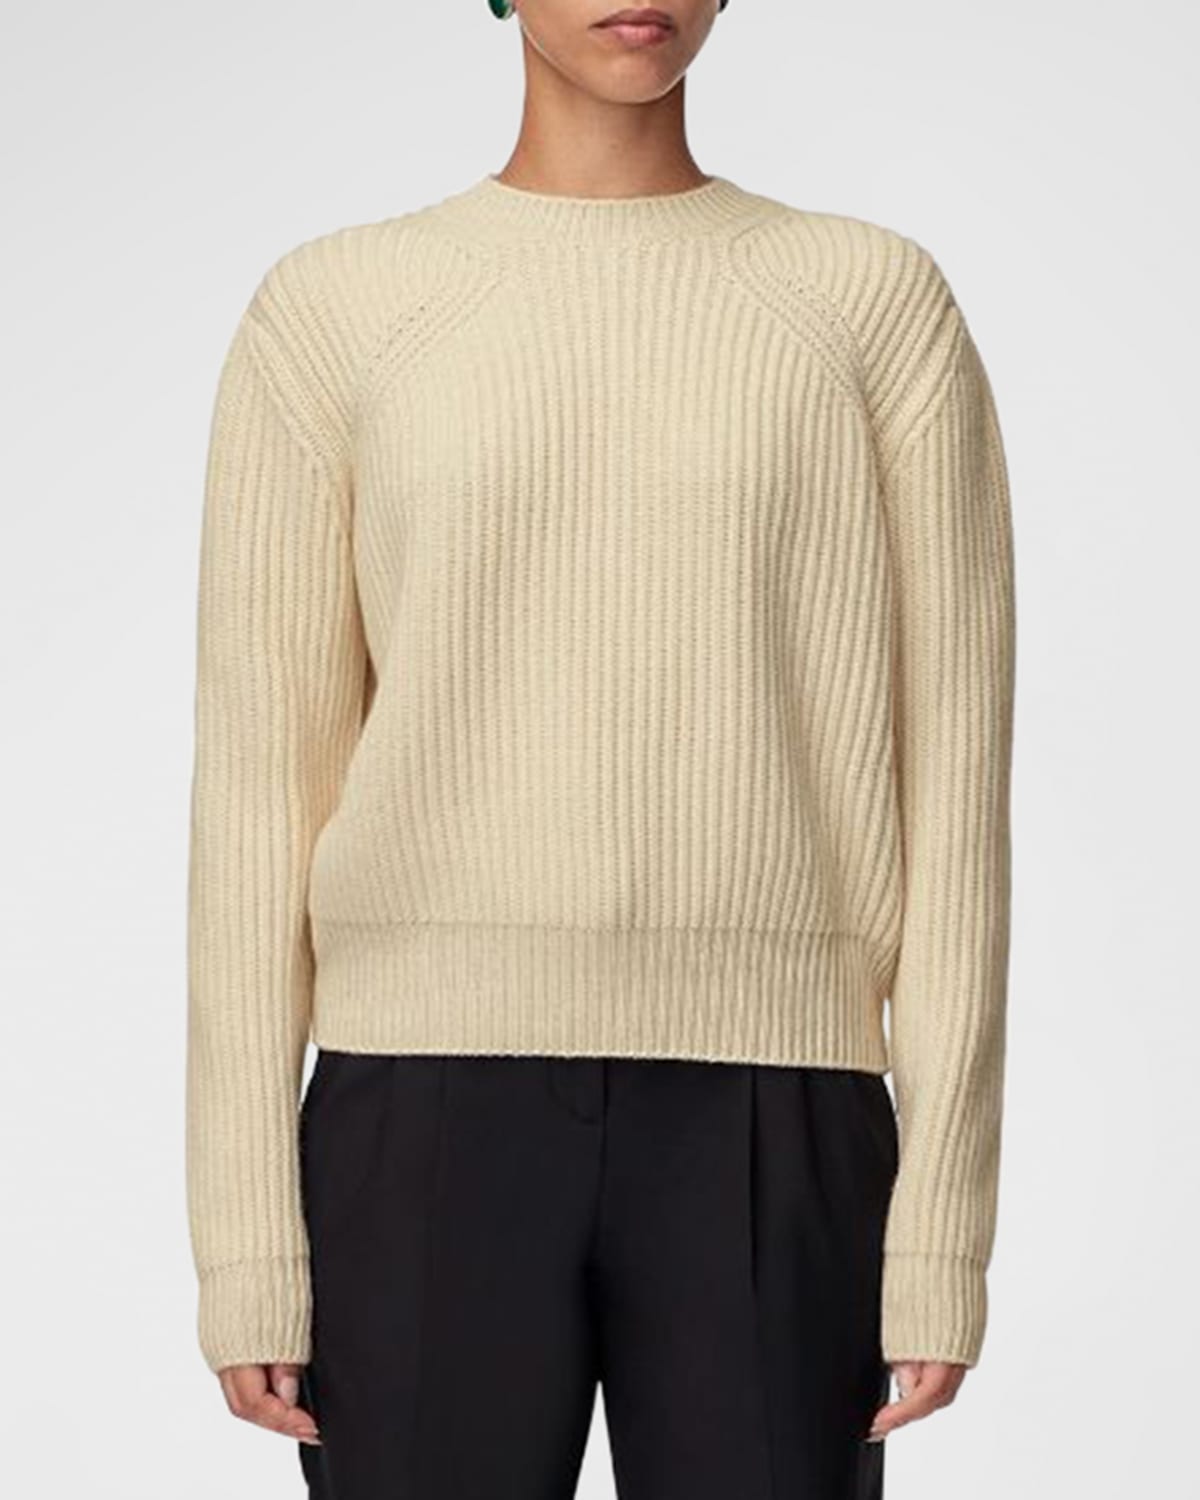 Another Tomorrow Women's Cashmere-wool Rib-knit Sweater In Ivory